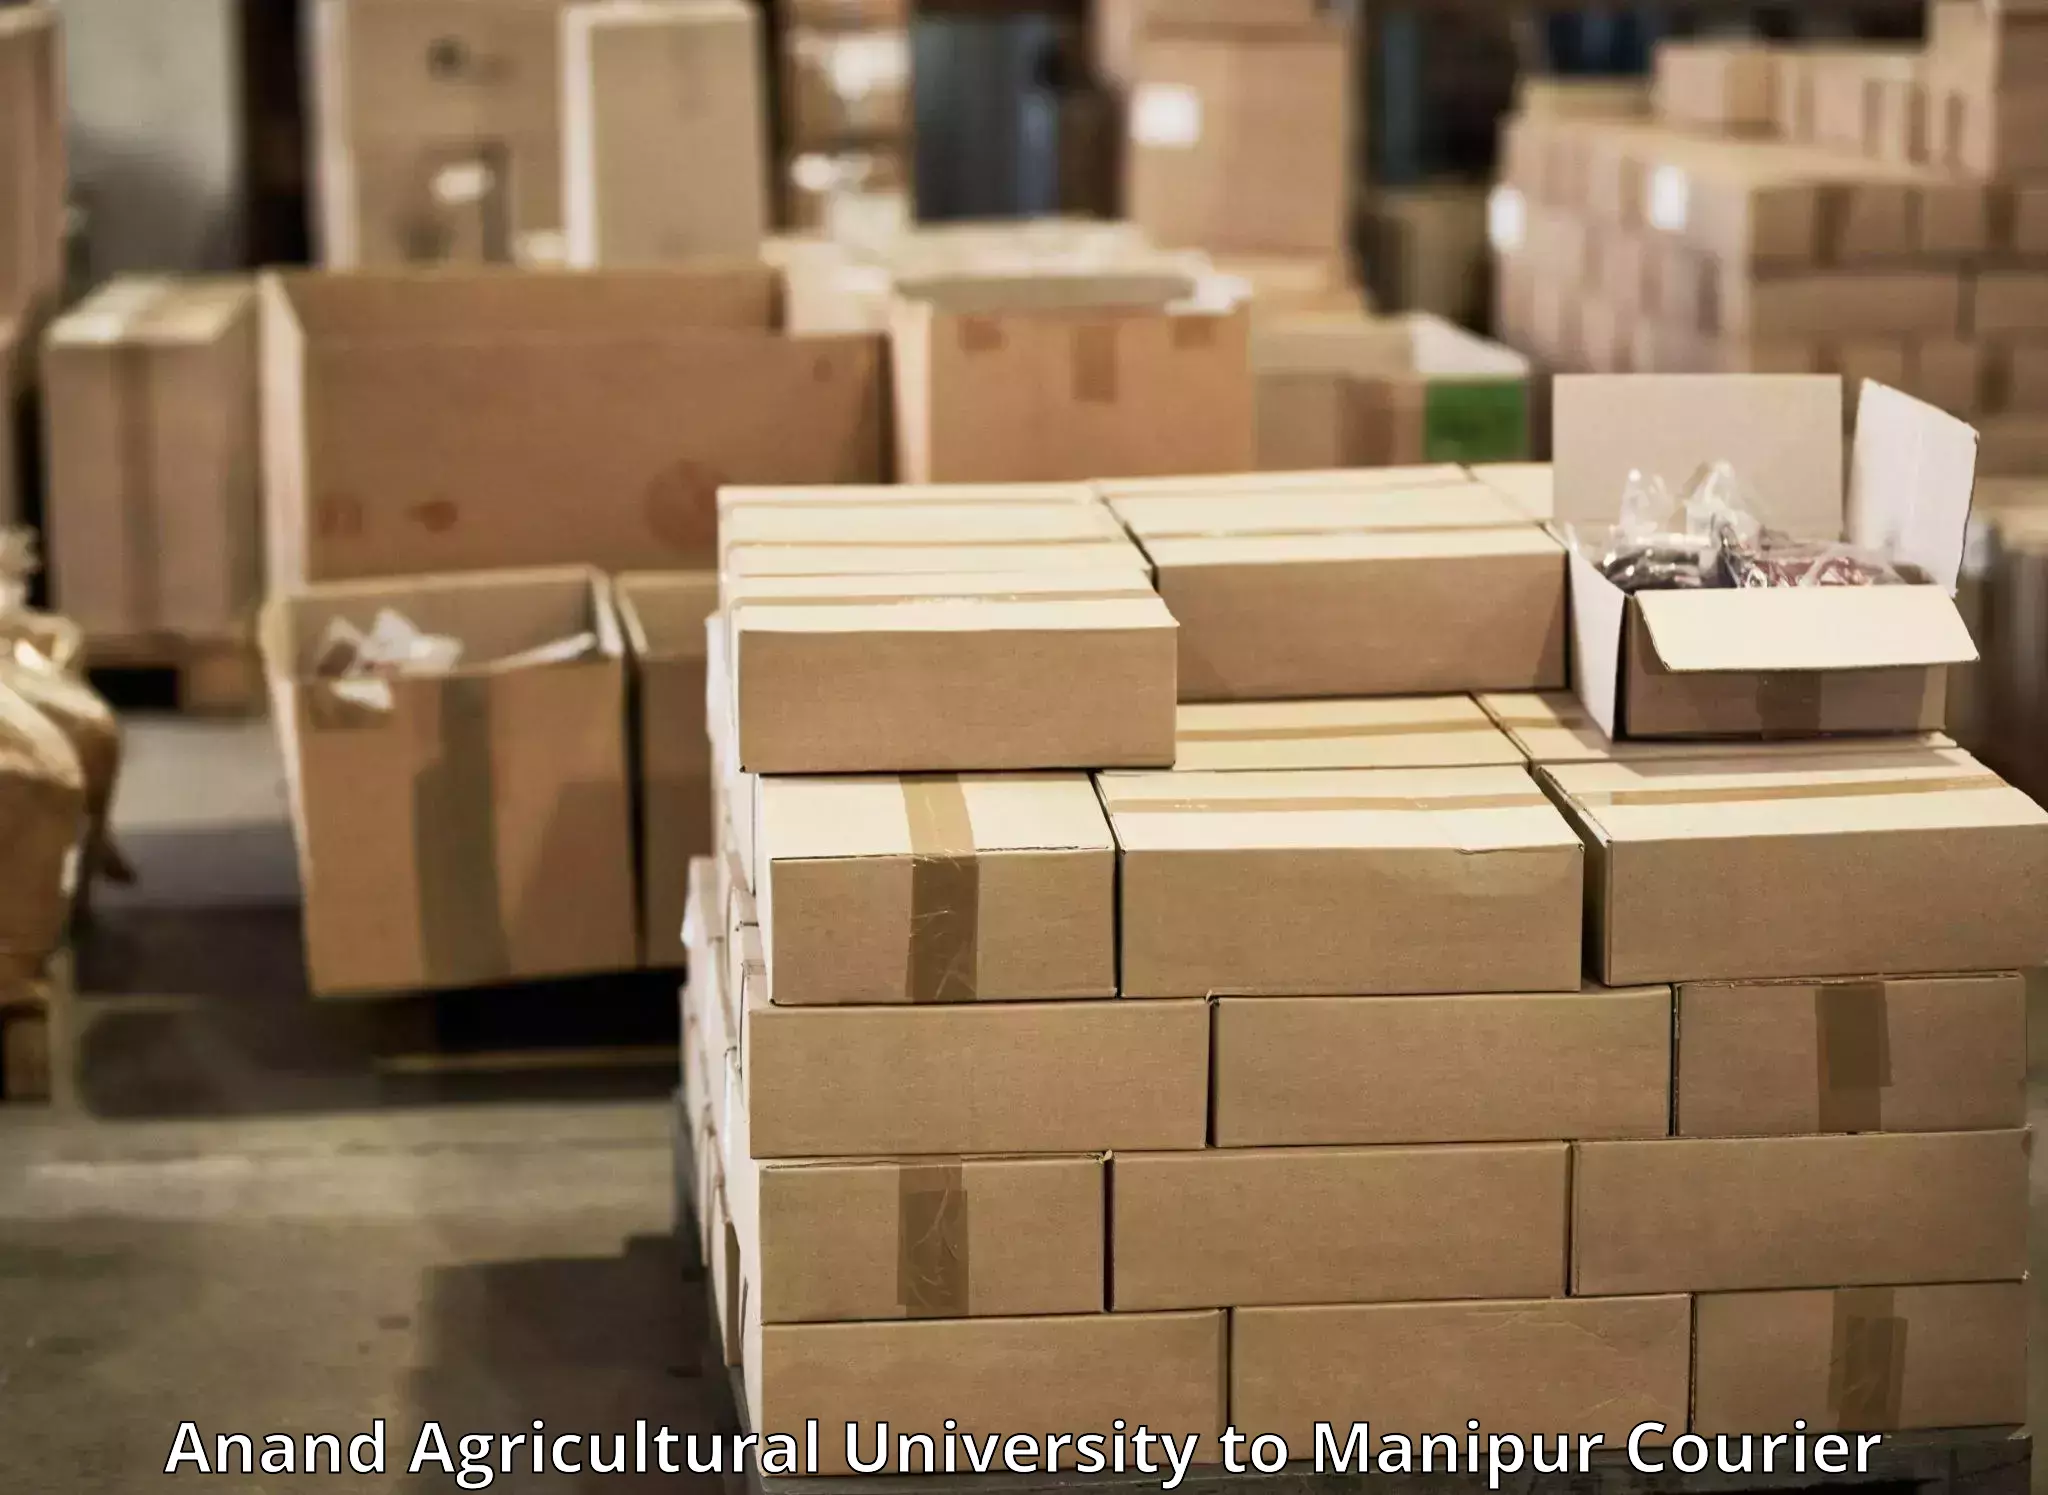 On-call courier service Anand Agricultural University to Thoubal